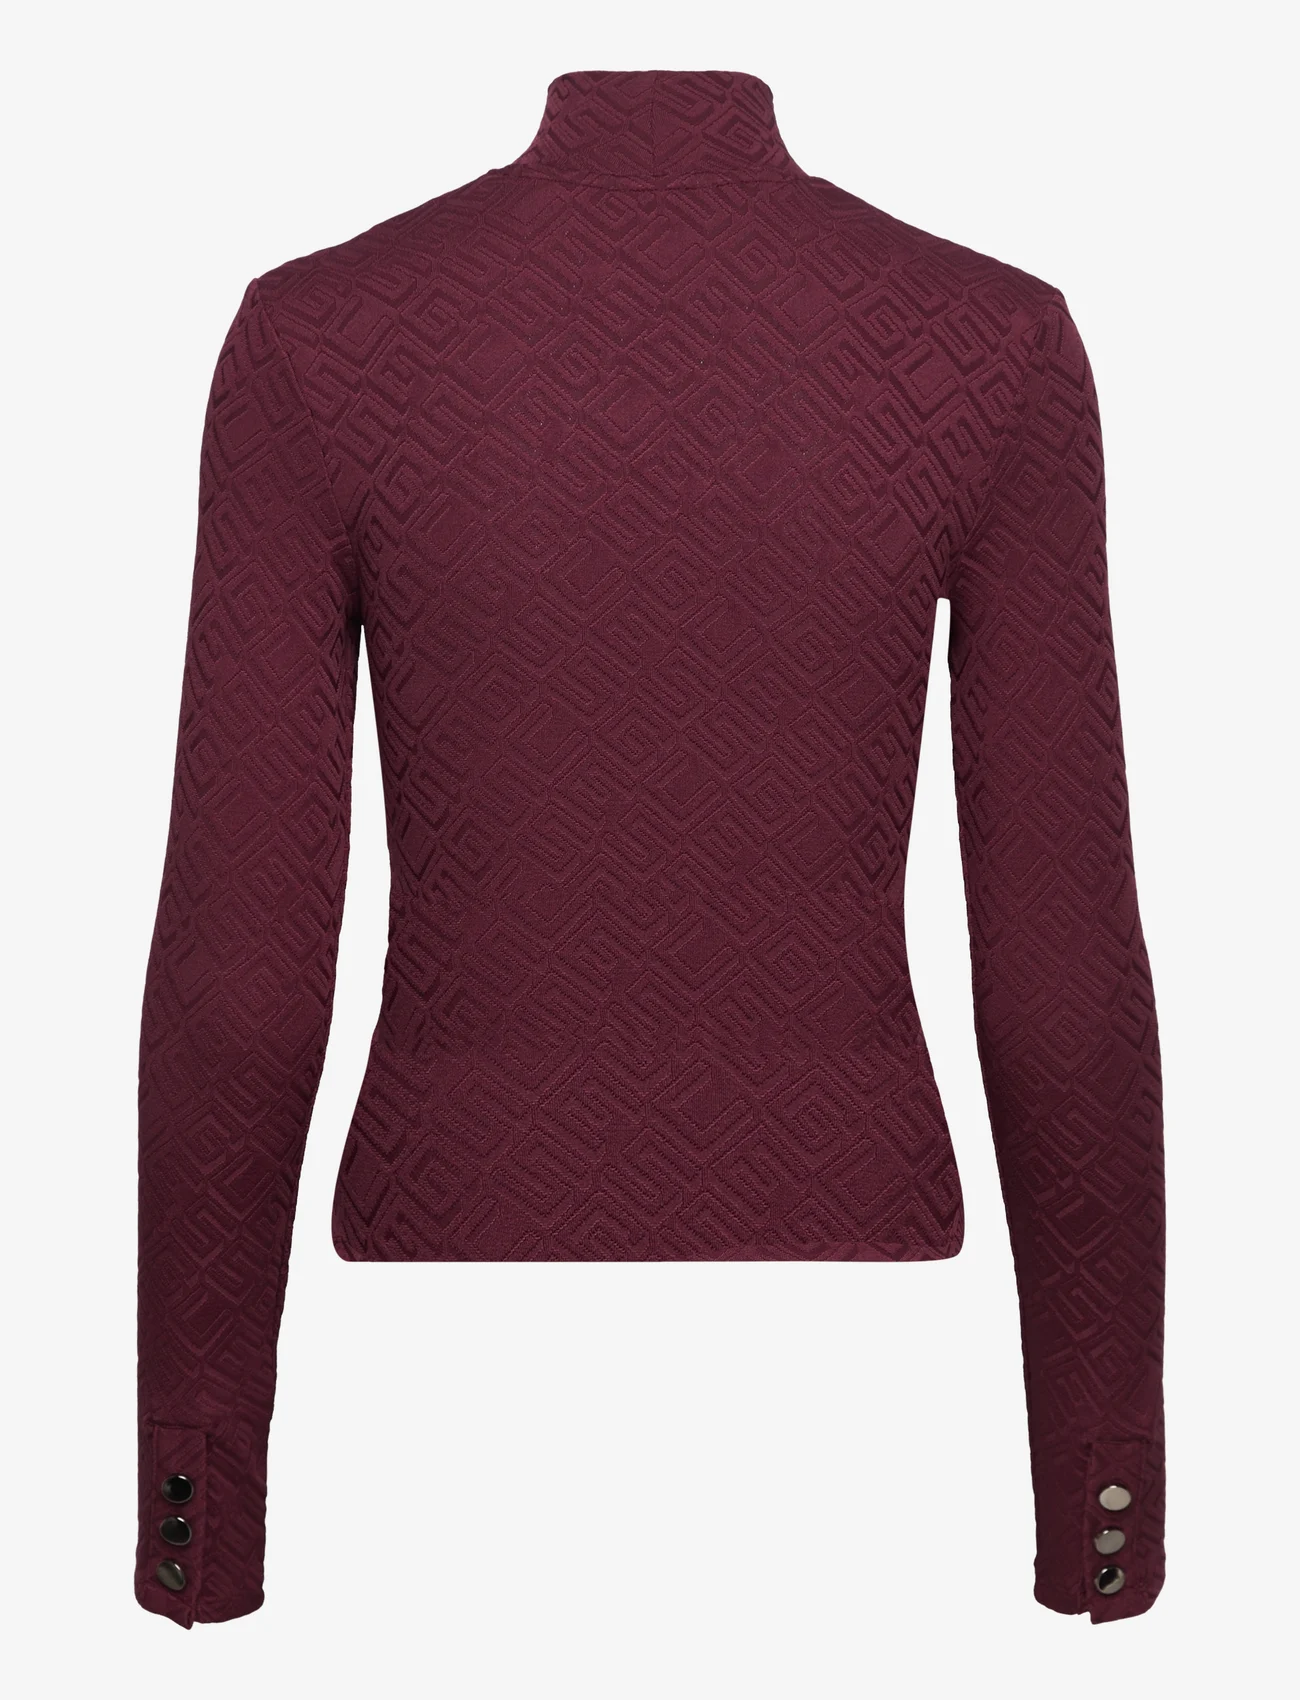 GUESS Jeans - LS CLIO TOP - pullover - mystic wine - 1